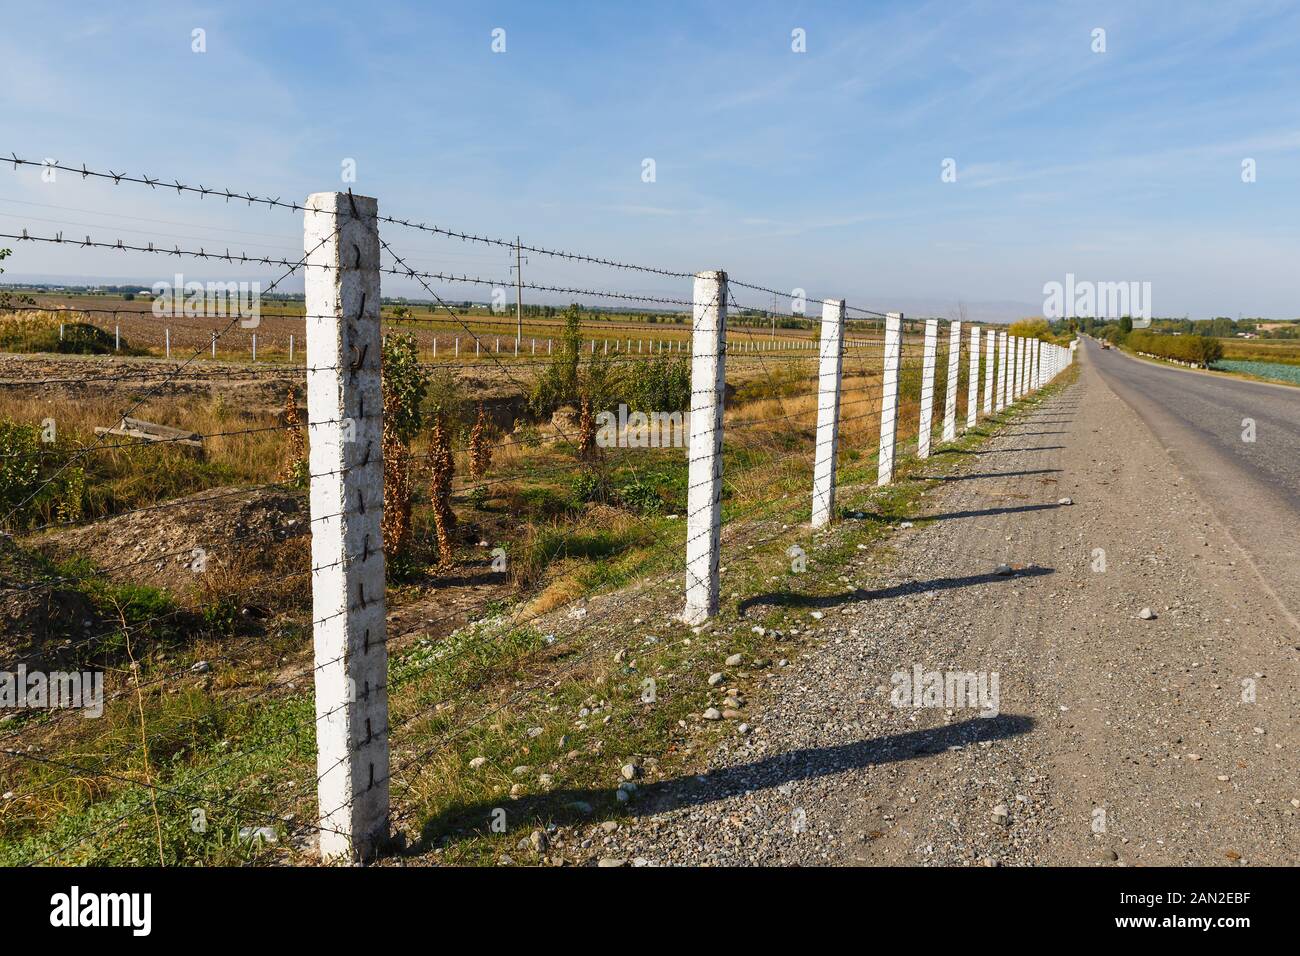 barbed wire fence along the road, state border between Kyrgyzstan and Uzbekistan Stock Photo